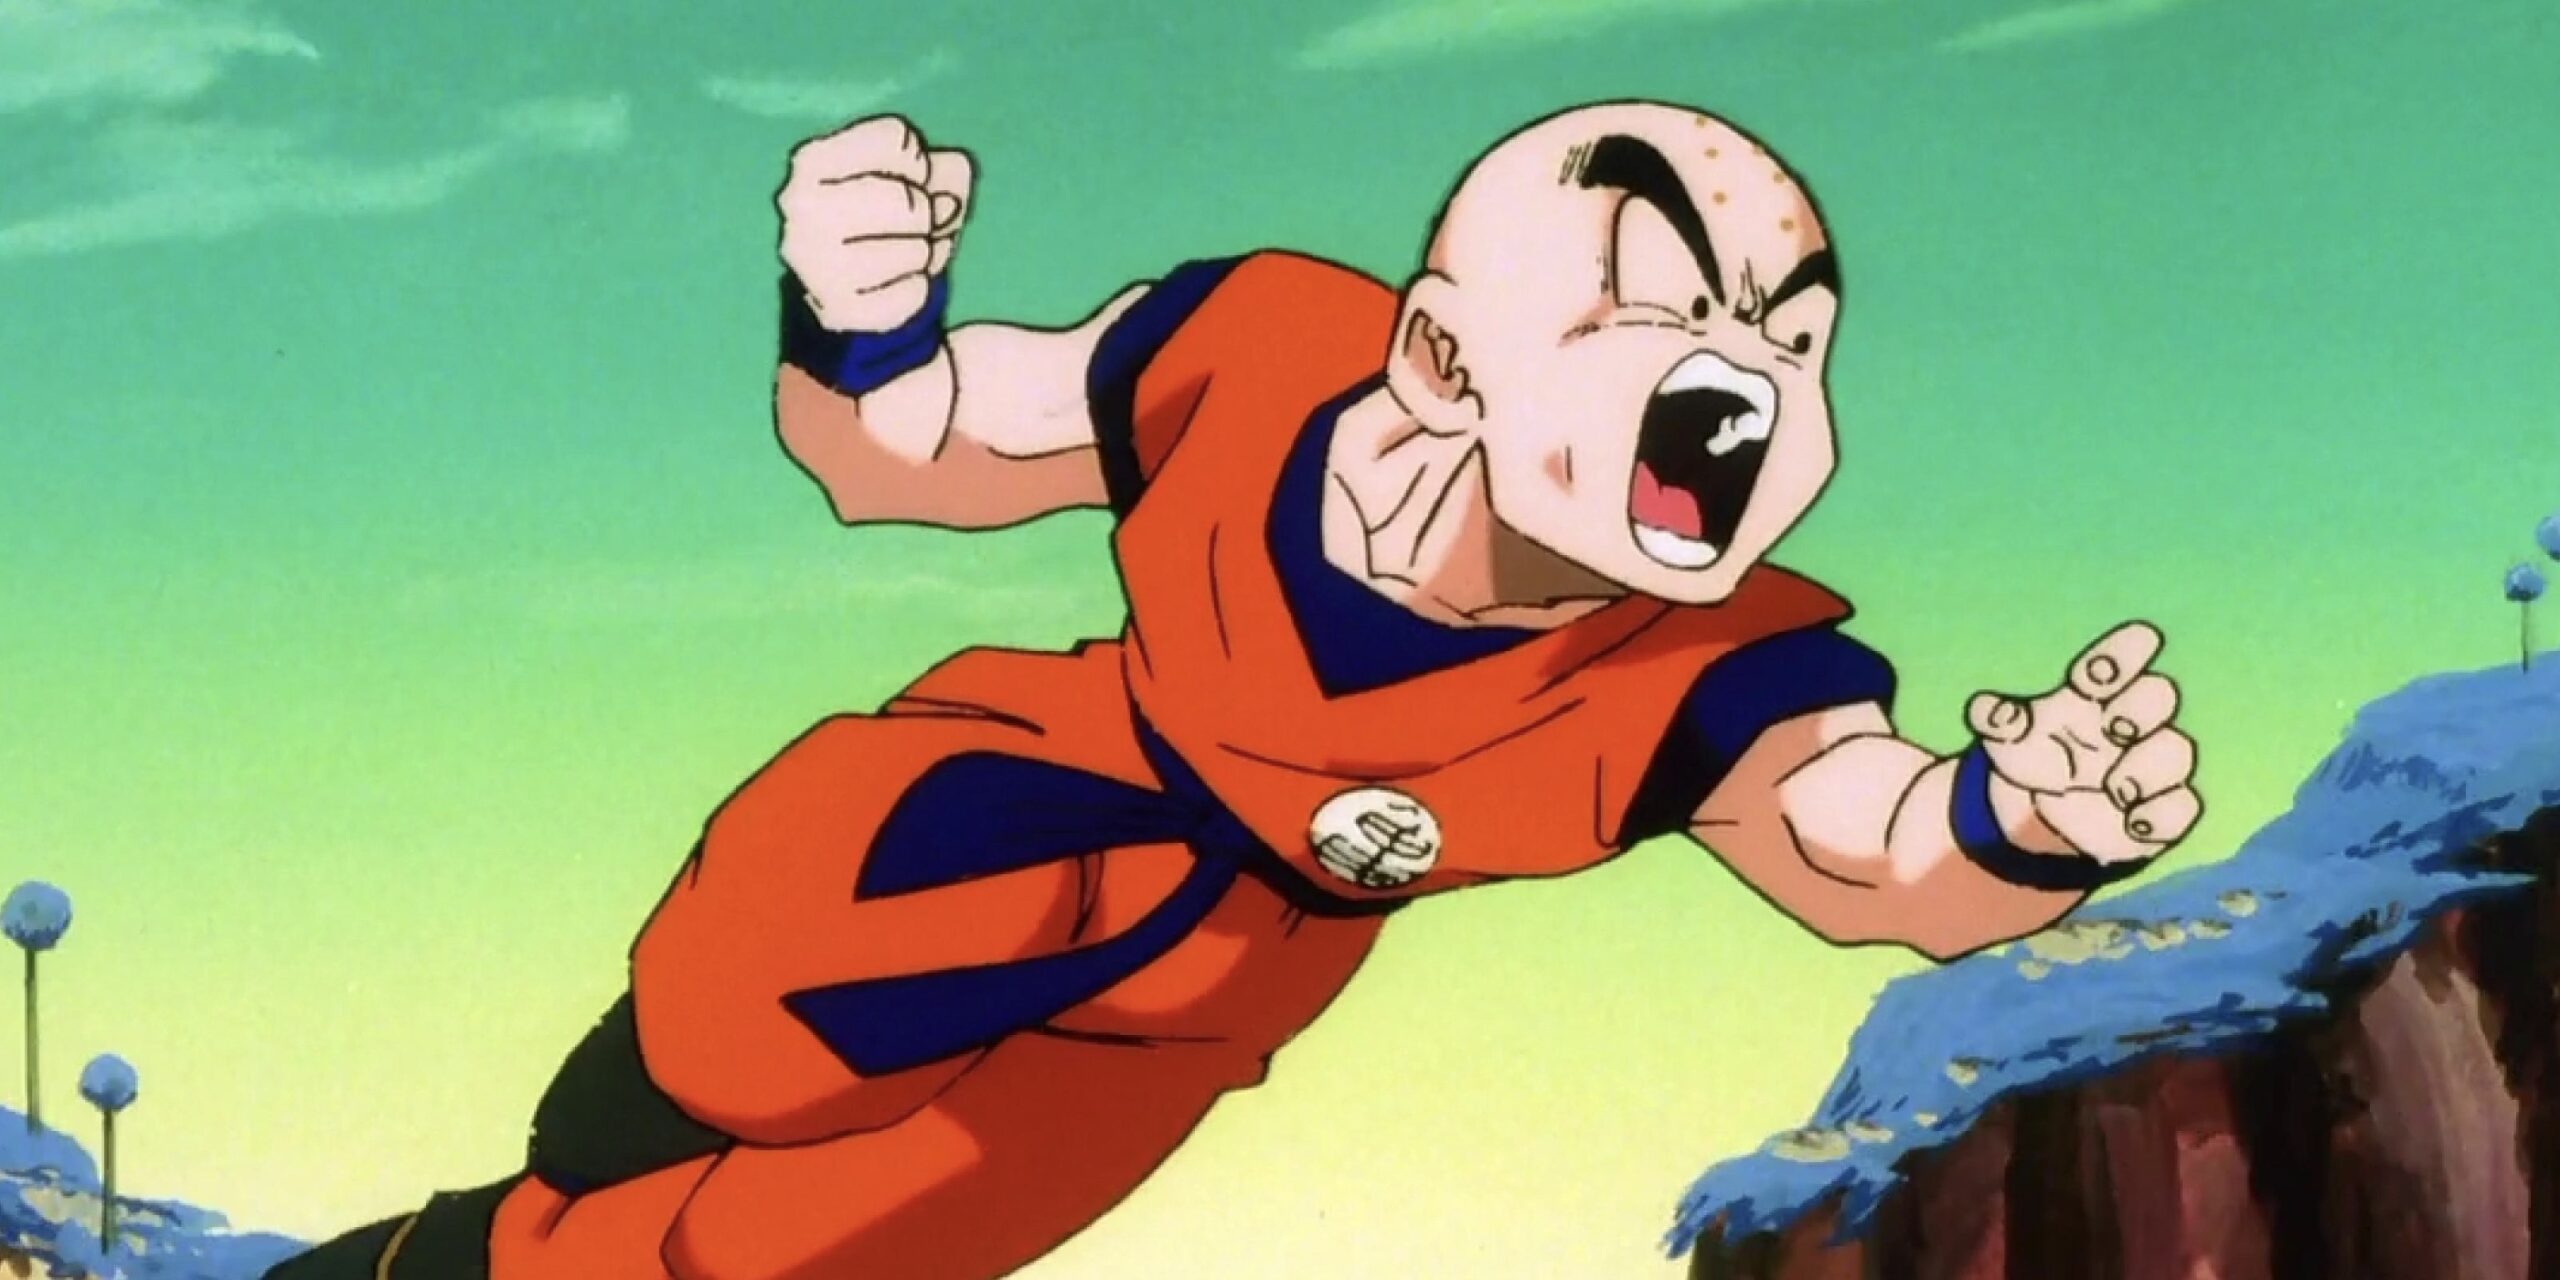 Krillin's Unexpected Love Interest Adds a Weird Twist to His Family Life in Dragon Ball